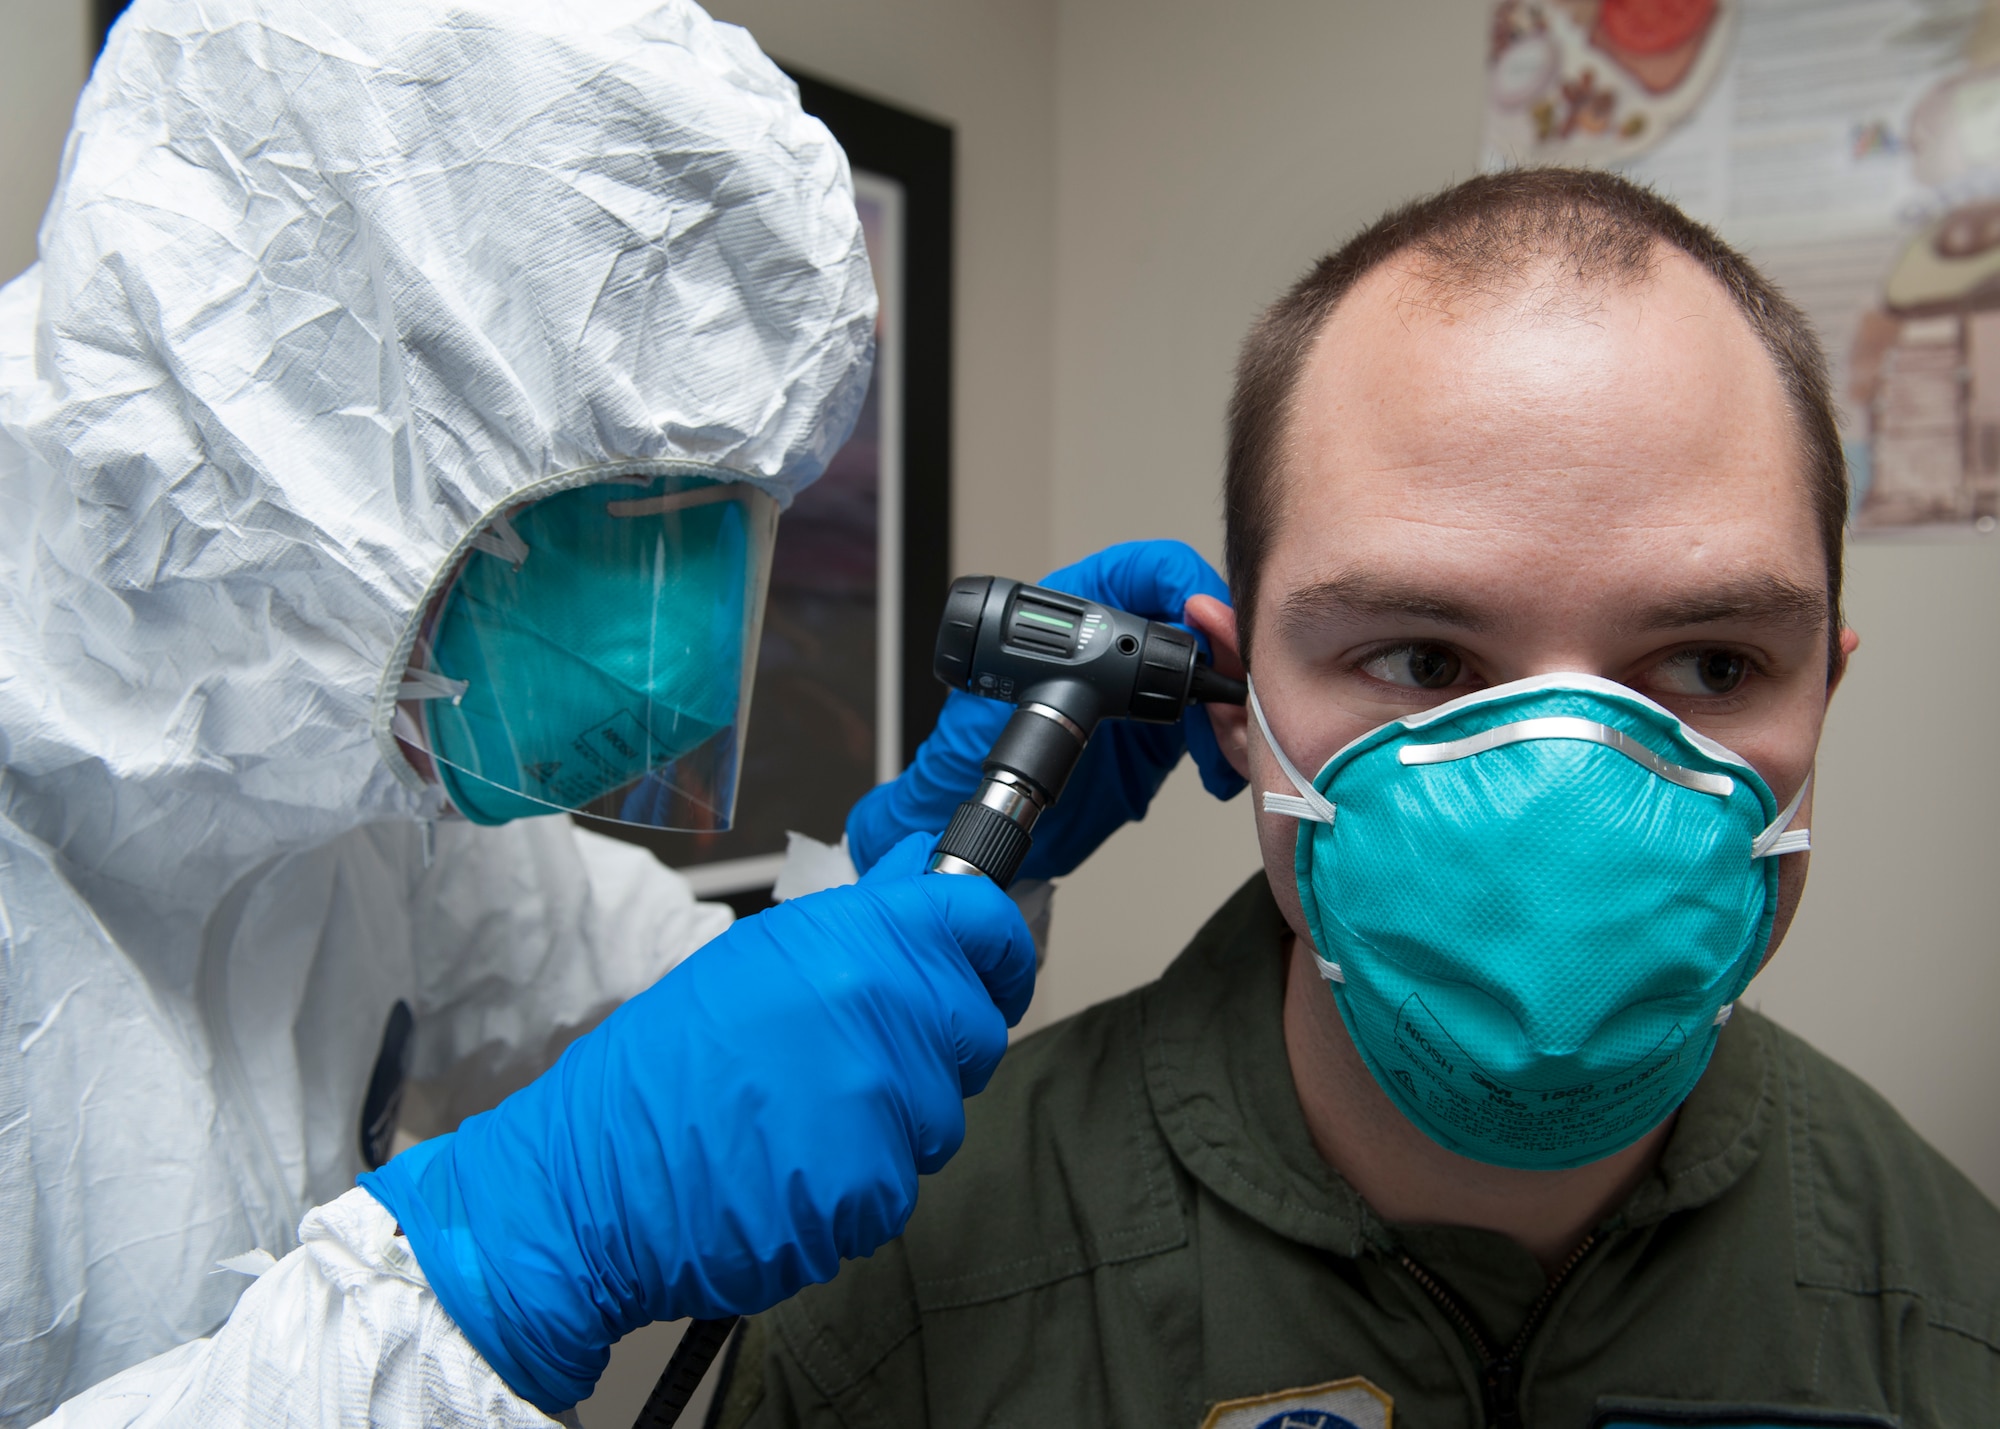 Maj. Troy Pearce, 436th Medical Operations Squadron staff physician, uses an otoscope to examine the ears of Senior Airman Peter Cannizzaro, 9th Airlift Squadron loadmaster, during an Ebola Response Plan and Transport exercise Nov. 3, 2015, at the 436th Medical Group Clinic on Dover Air Force Base, Del. Cannizzaro volunteered to play the role of a suspected Ebola virus carrying patient. (U.S. Air Force photo/Senior Airman Zachary Cacicia)